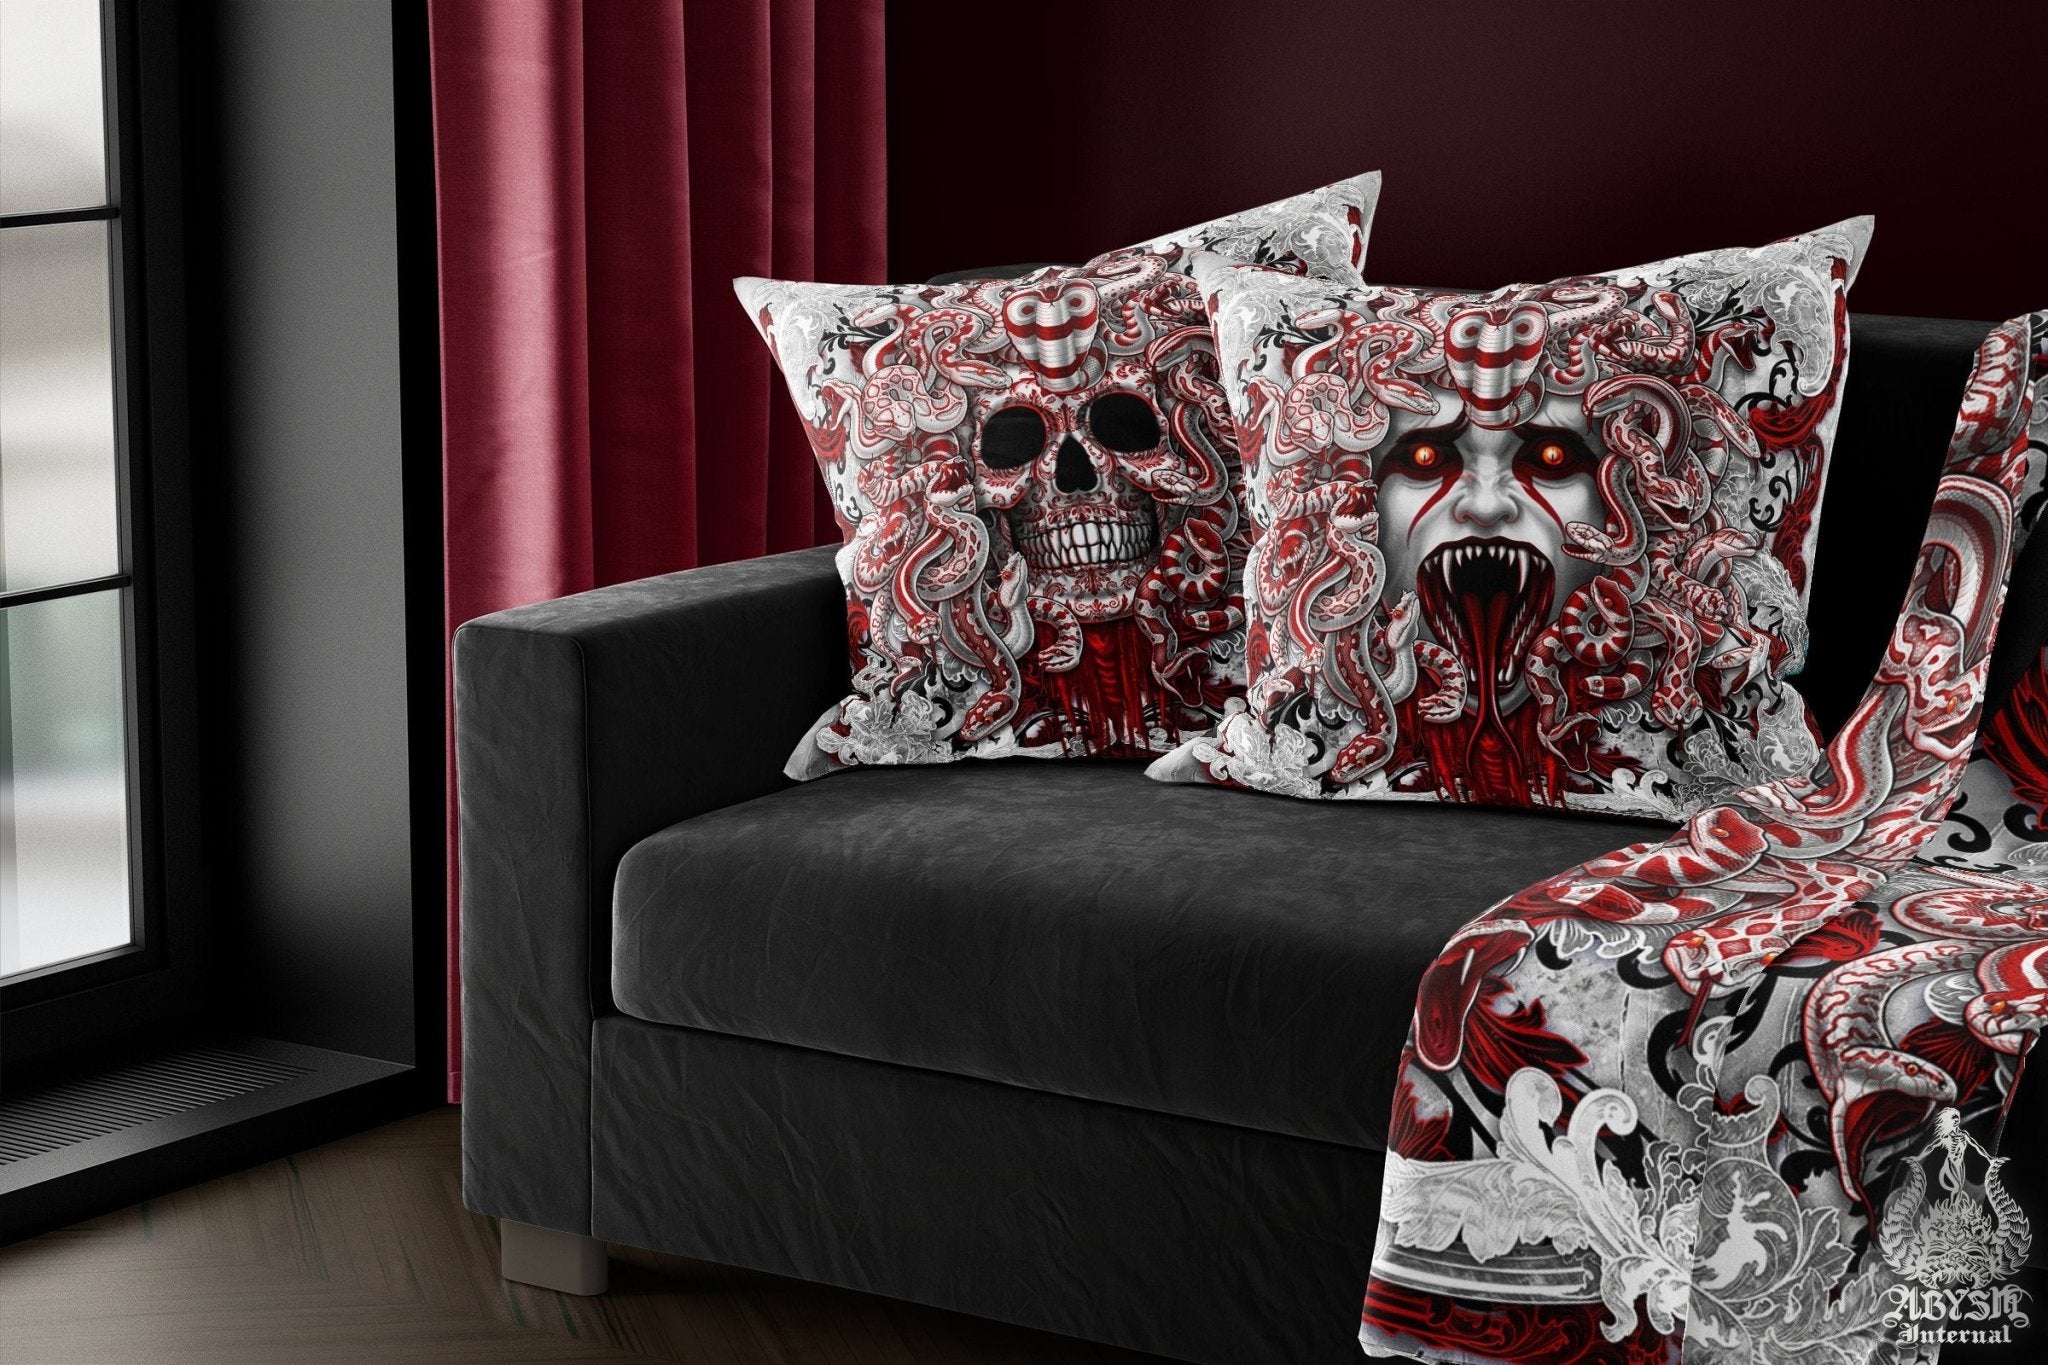 Skull Throw Pillow, Decorative Accent Cushion, White Goth Room Decor, Horror and Gothic Art, Alternative Home - Bloody White Medusa Snakes - Abysm Internal